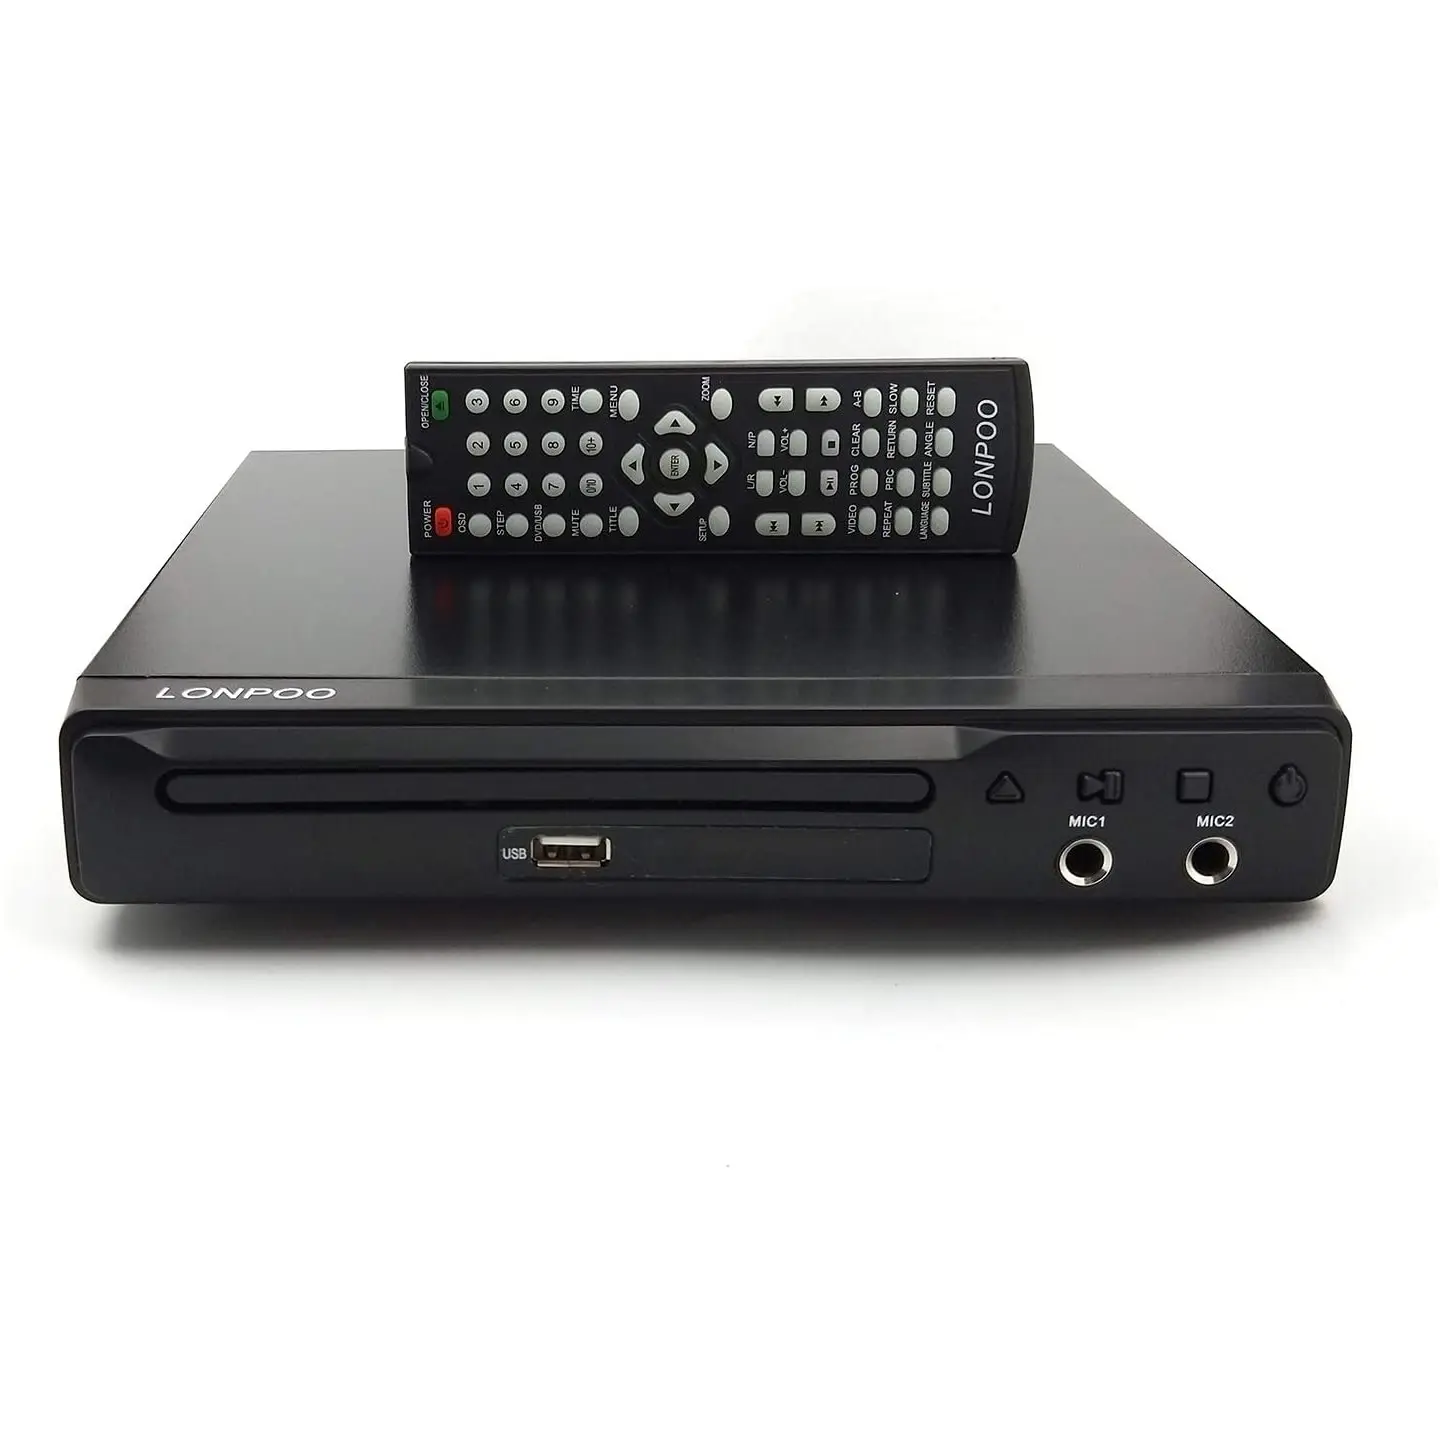 Lonpoo 2021 New Arrivals Black 225*38mm Size Household Dvd Player For Selling